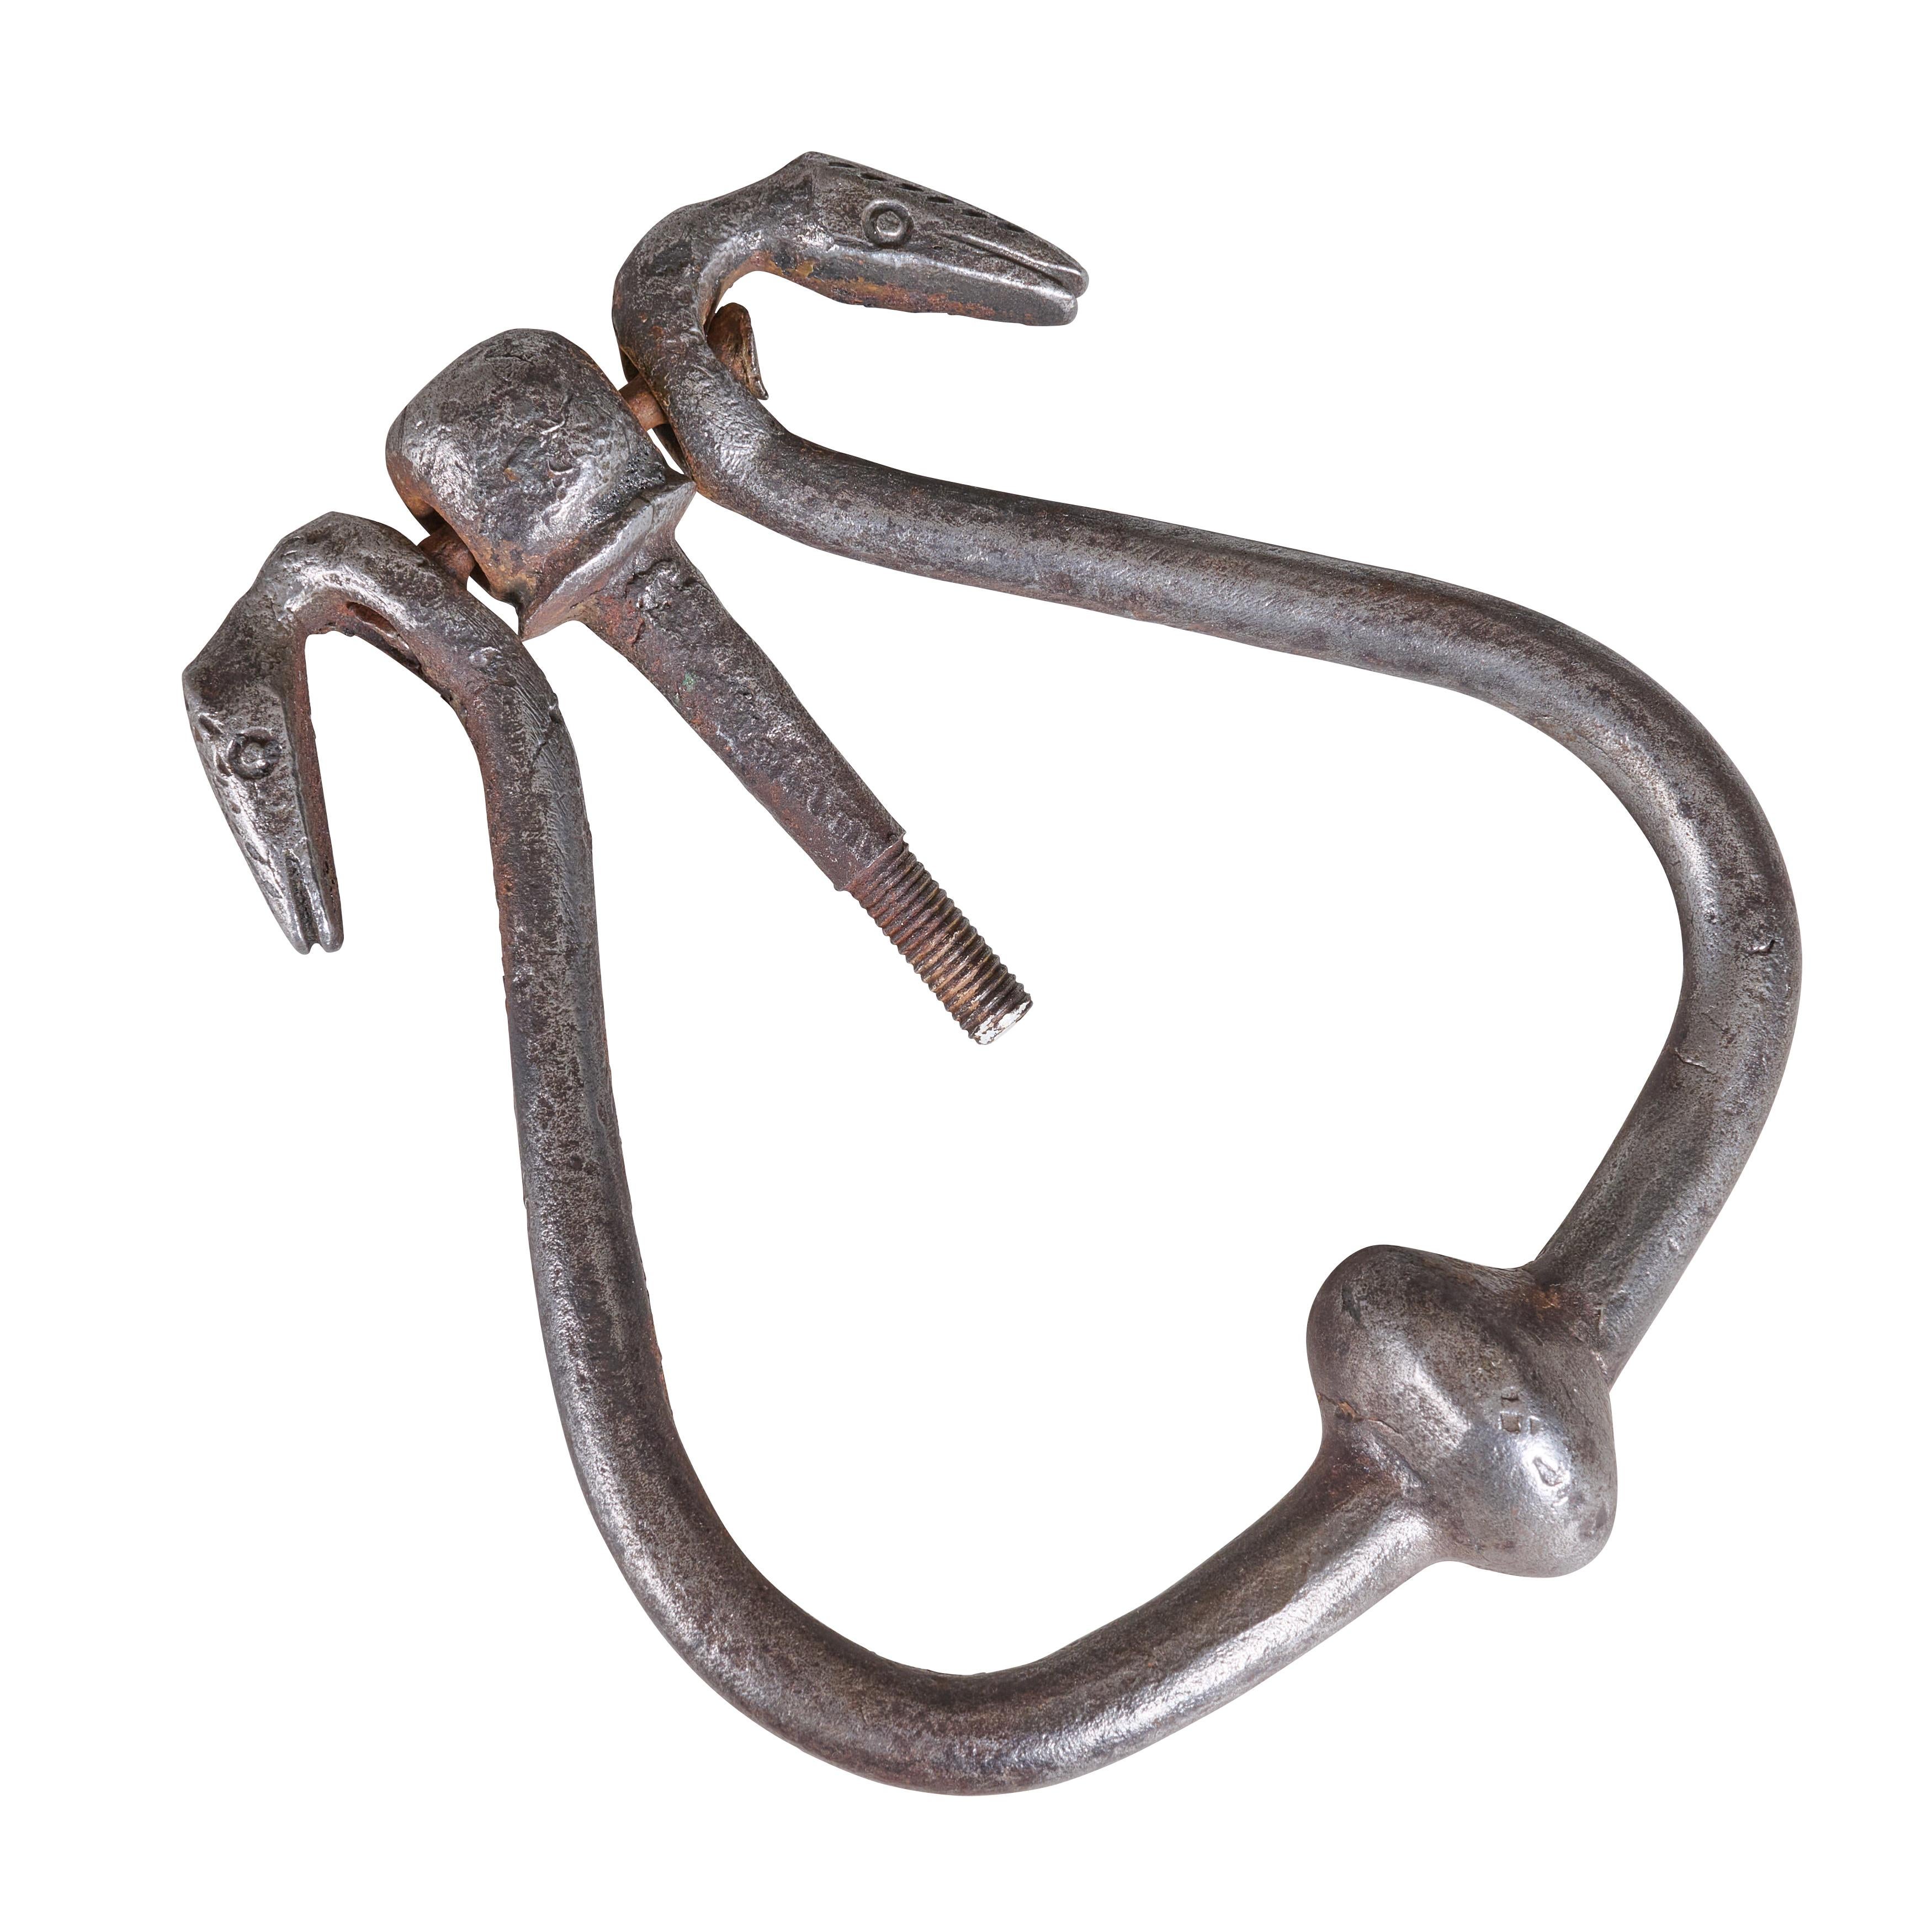 14th century (that's old) wrought iron door knocker with serpent heads.

